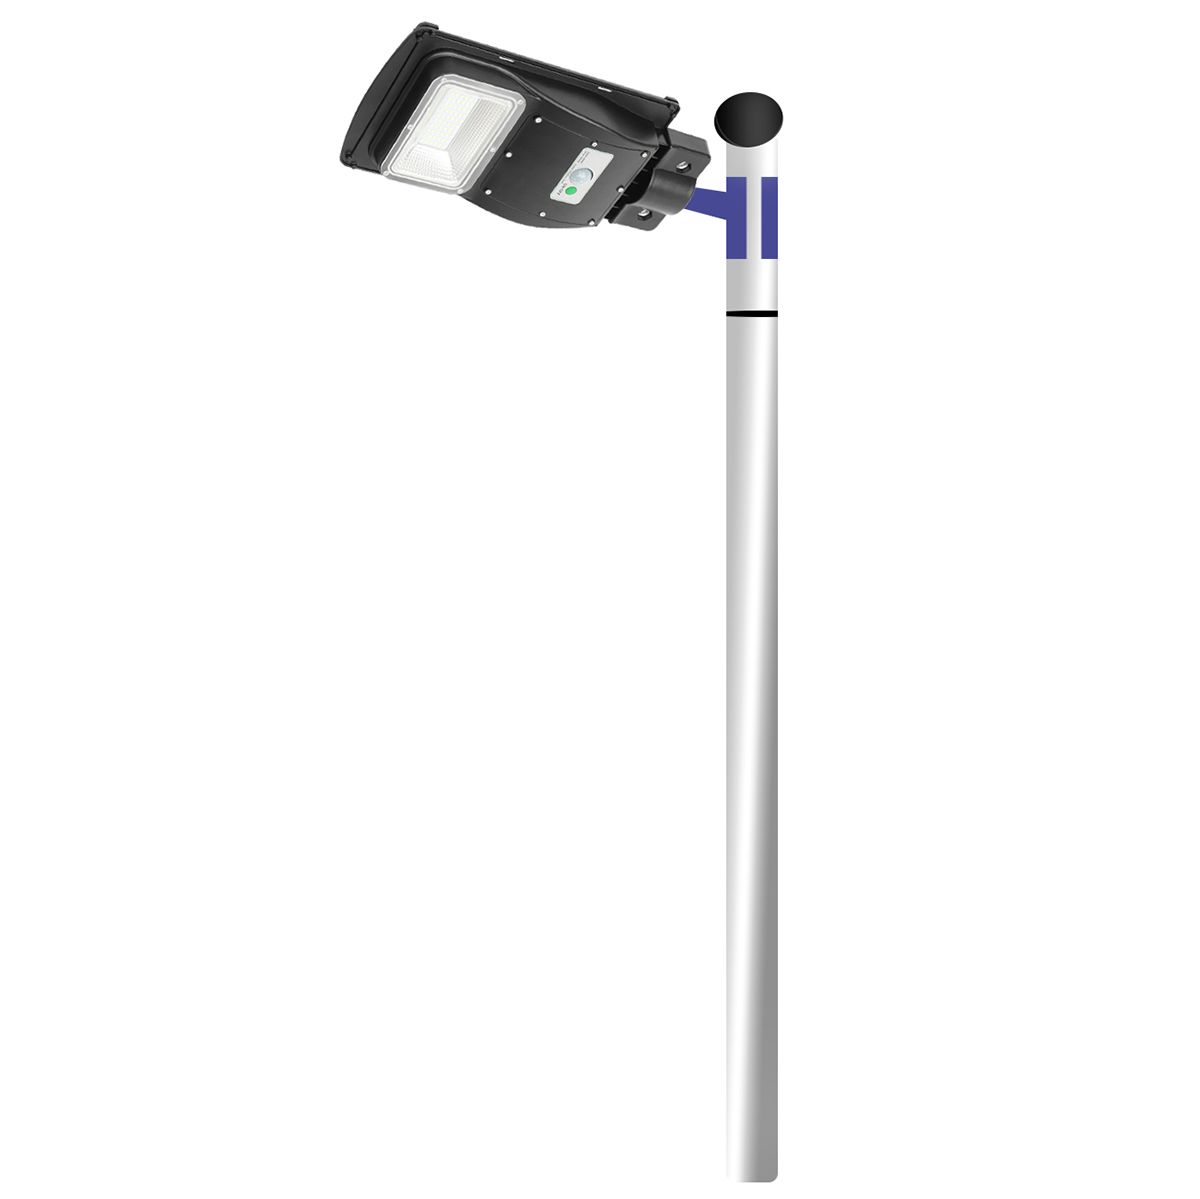 30W-60LED-Solar-Powered-Street-Light-8500K-LED-Wall-Lamp-Waterproof-IP67-LightRemote-Control-Commerc-1641507